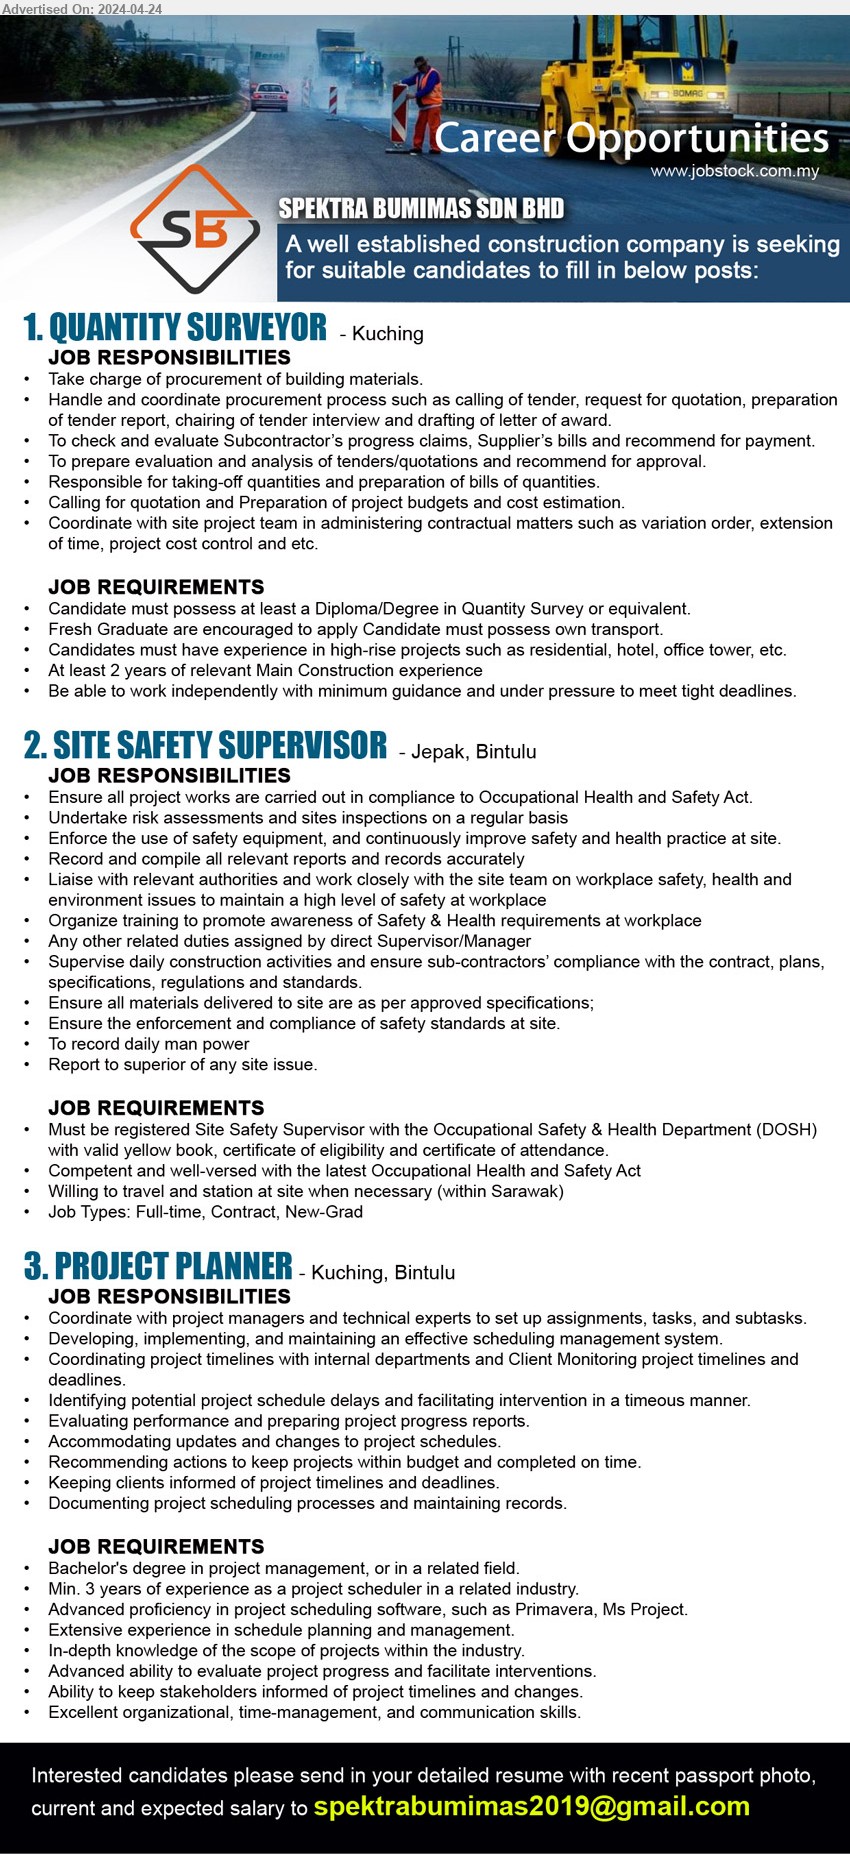 SPEKTRA BUMIMAS SDN BHD - 1. QUANTITY SURVEYOR (Kuching),  Diploma/Degree in Quantity Survey, Fresh Graduate are encouraged to apply Candidate must possess own transport.,...
2. SITE SAFETY SUPERVISOR (Jepak, Bintulu), Must be registered Site Safety Supervisor with the Occupational Safety & Health Department (DOSH) with valid yellow book, certificate of eligibility and certificate of attendance.,...
3. PROJECT PLANNER (Kuching, Bintulu), Bachelor's degree in project management, Min. 3 years of experience as a project scheduler in a related industry.,...
Email resume to ...